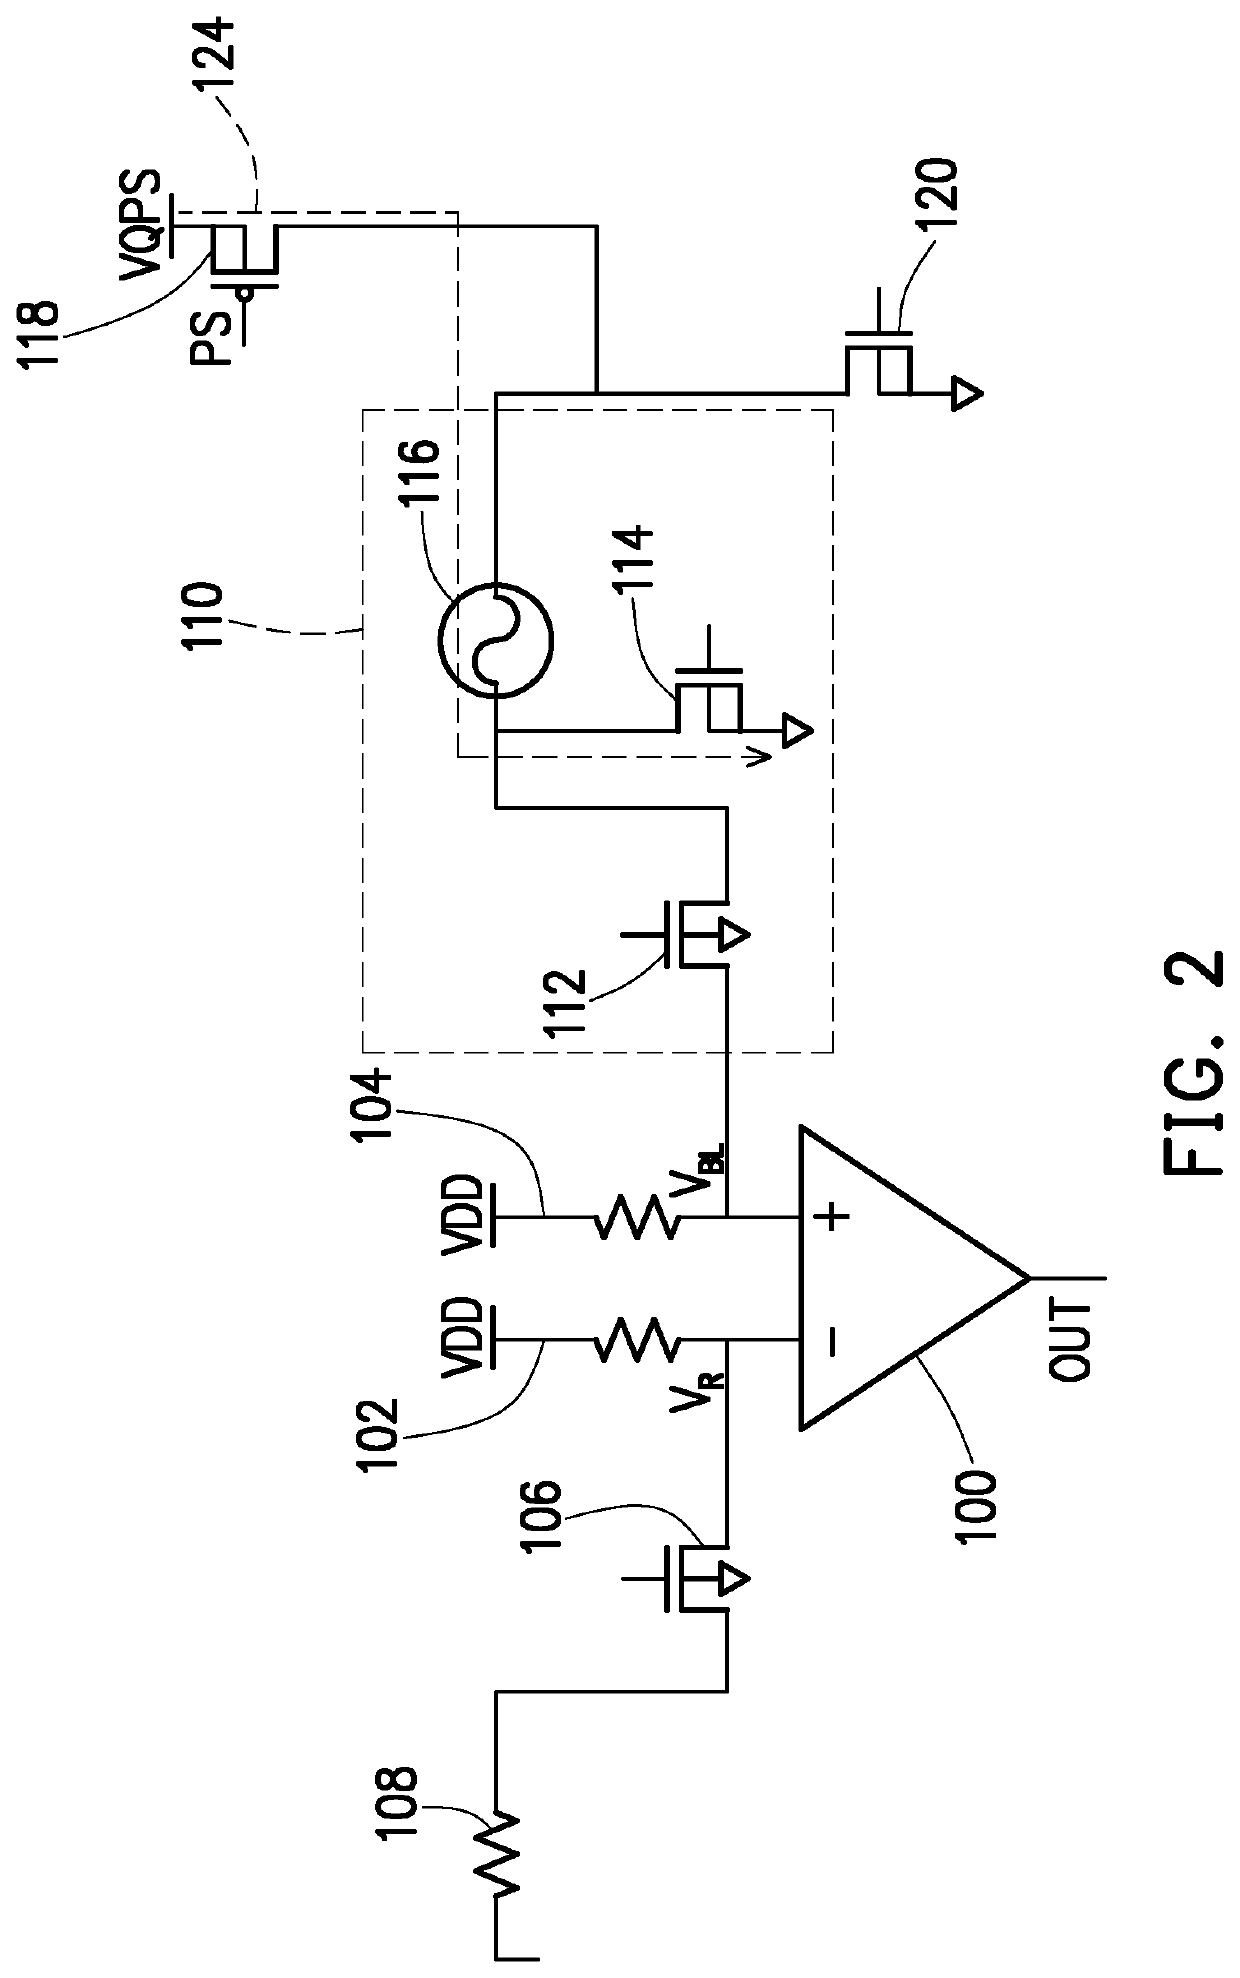 Power circuit, electronic fuse circuit, and method for providing power to electronic fuse circuit